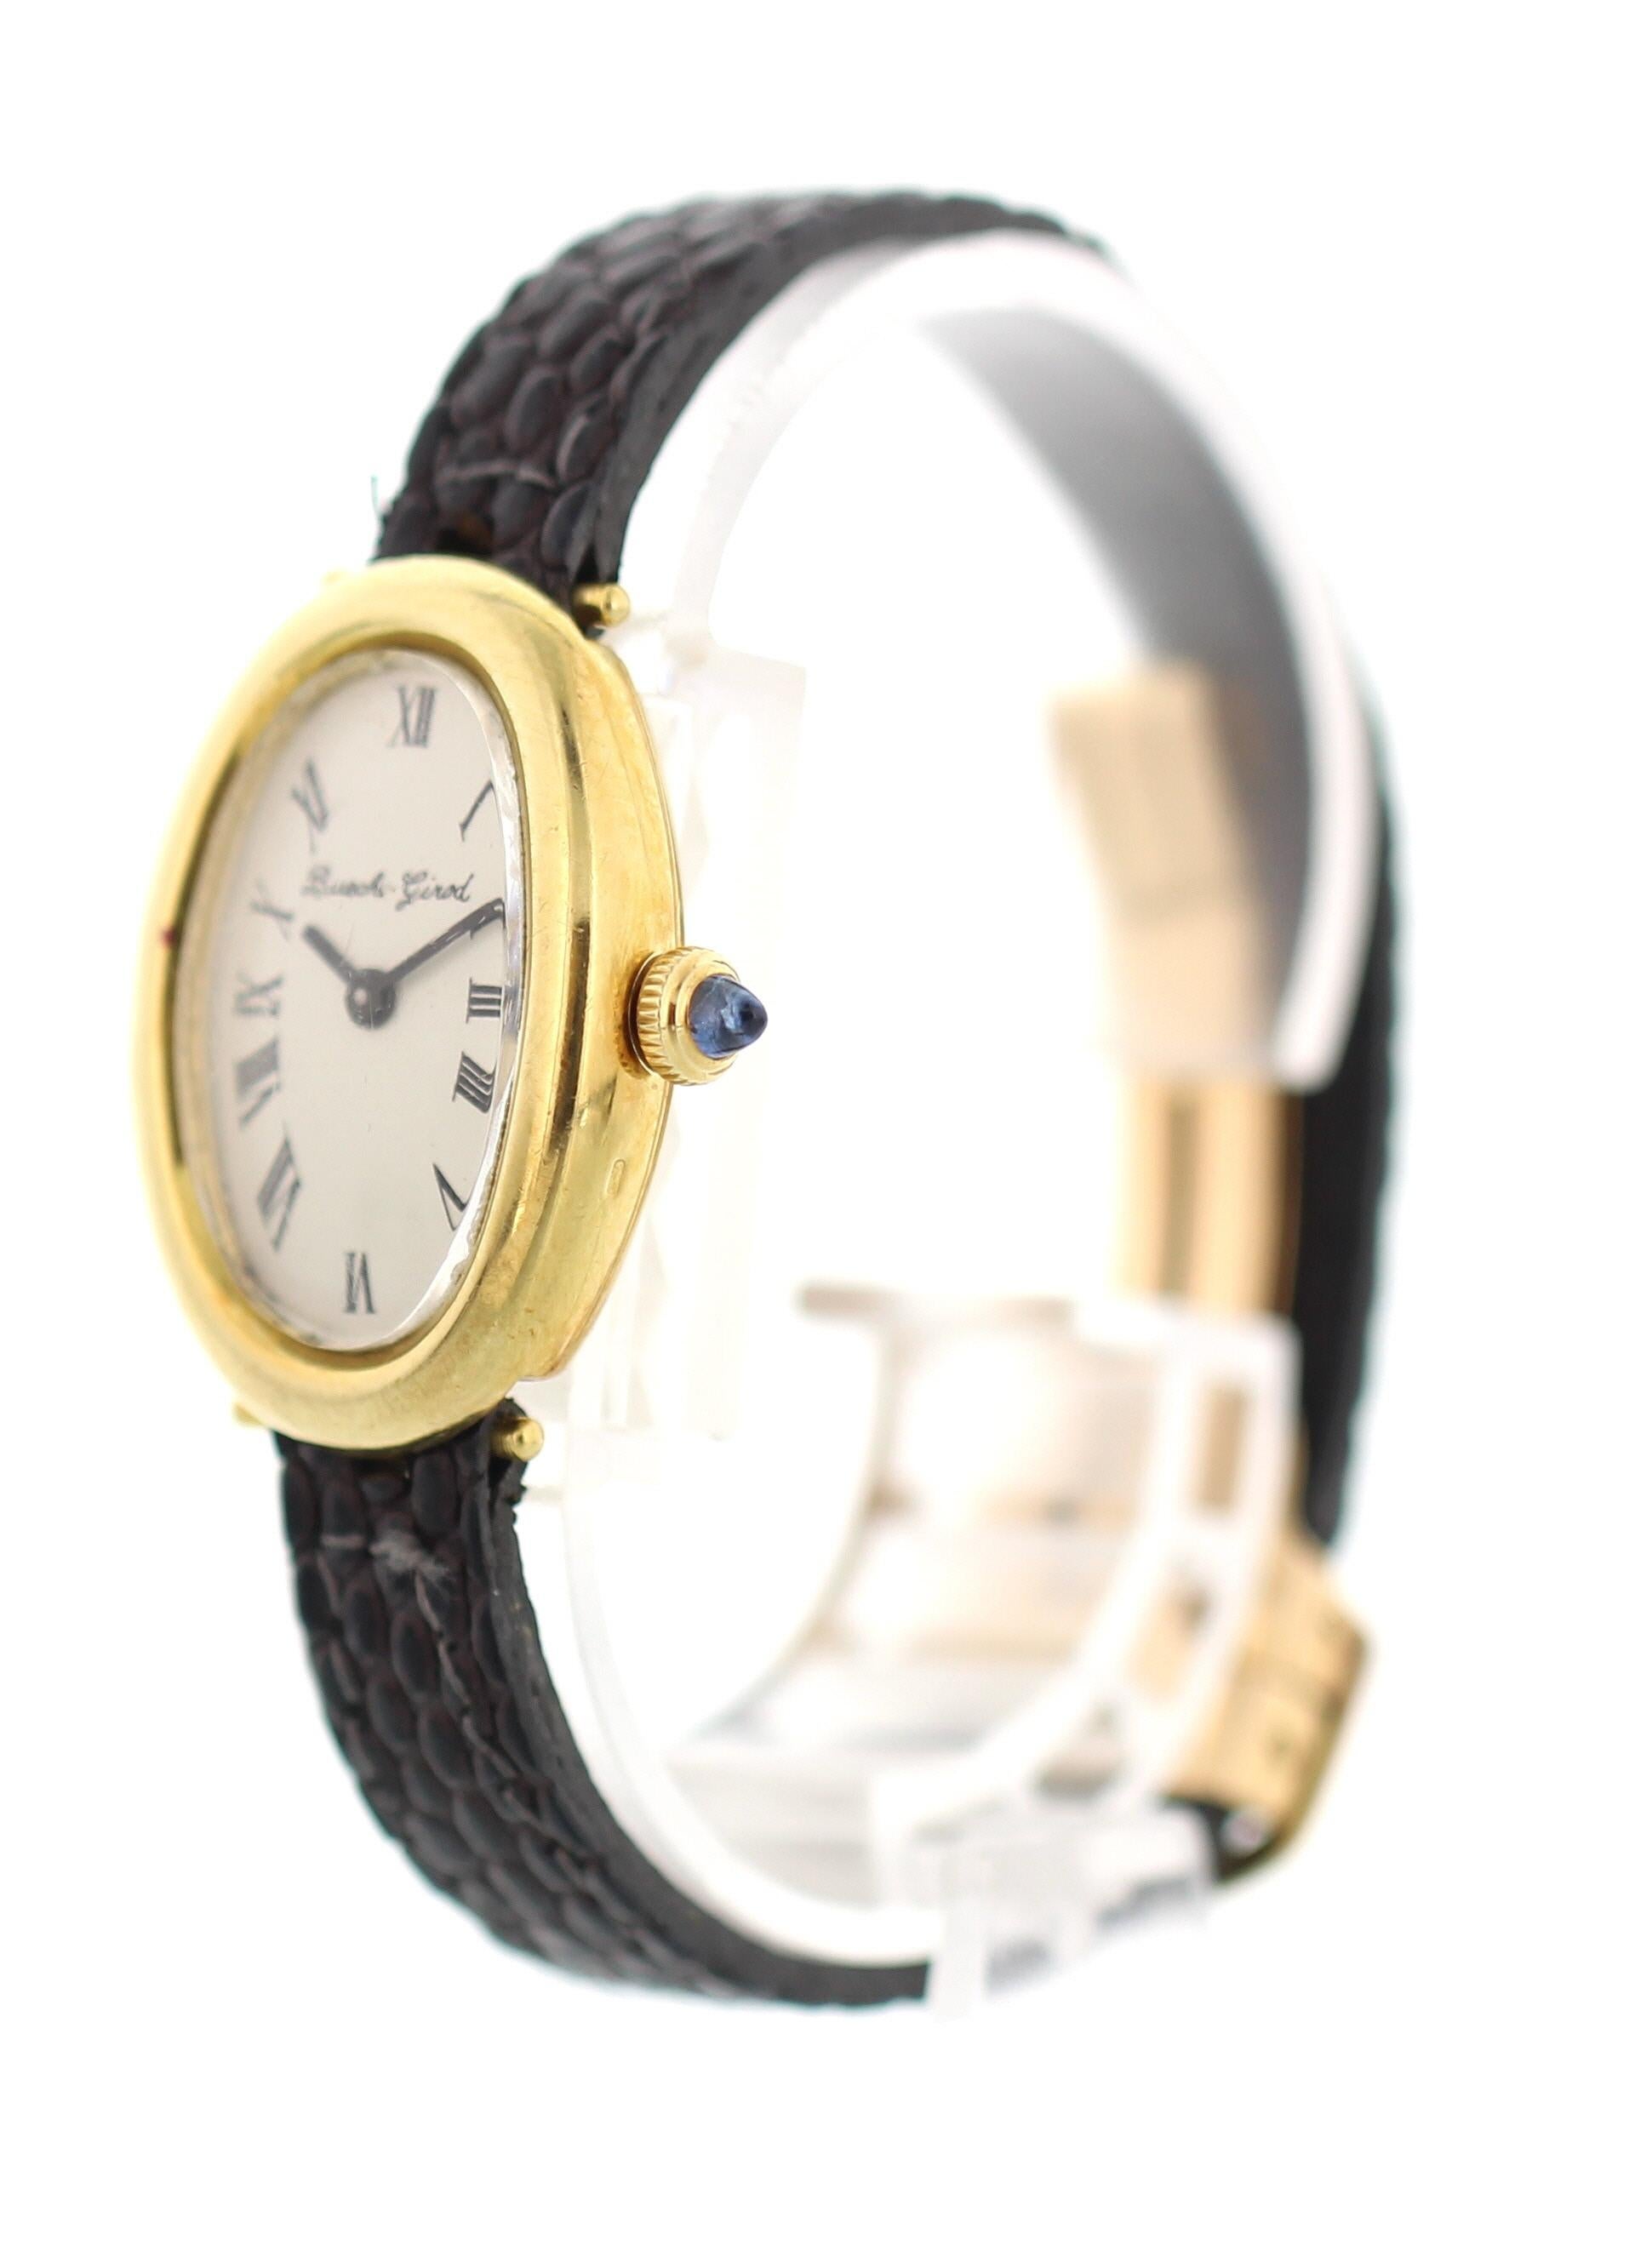 Ladies Vintage 18 Karat Yellow Gold Bueche Girod Watch In Excellent Condition For Sale In New York, NY